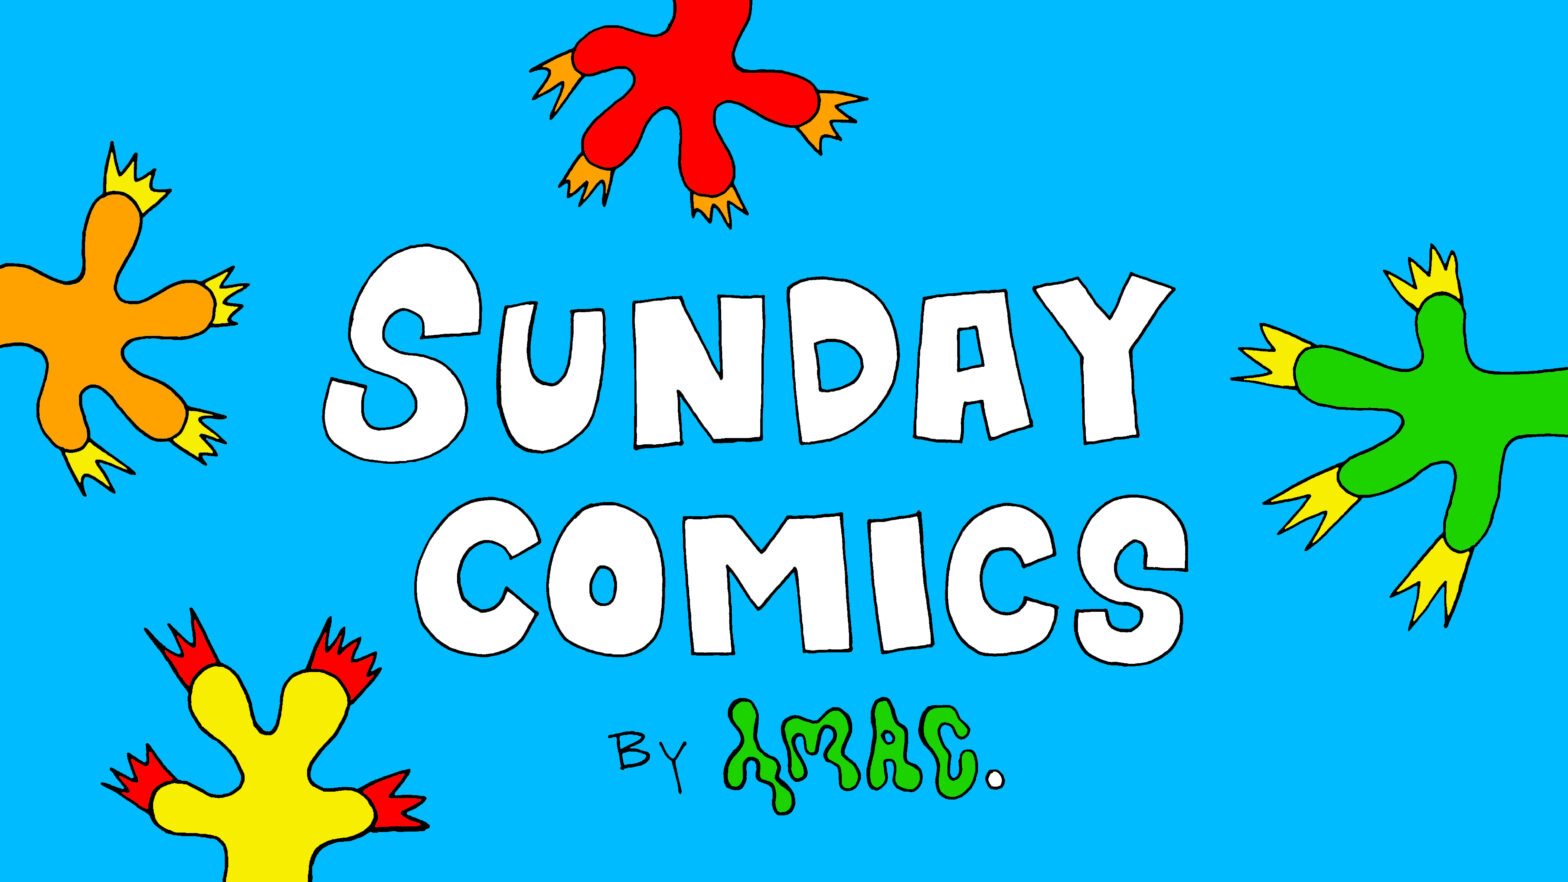 Blue background with orange, red, yellow and green illustrated hands reaching for a title that reads: "Sunday Comics by HMAC"